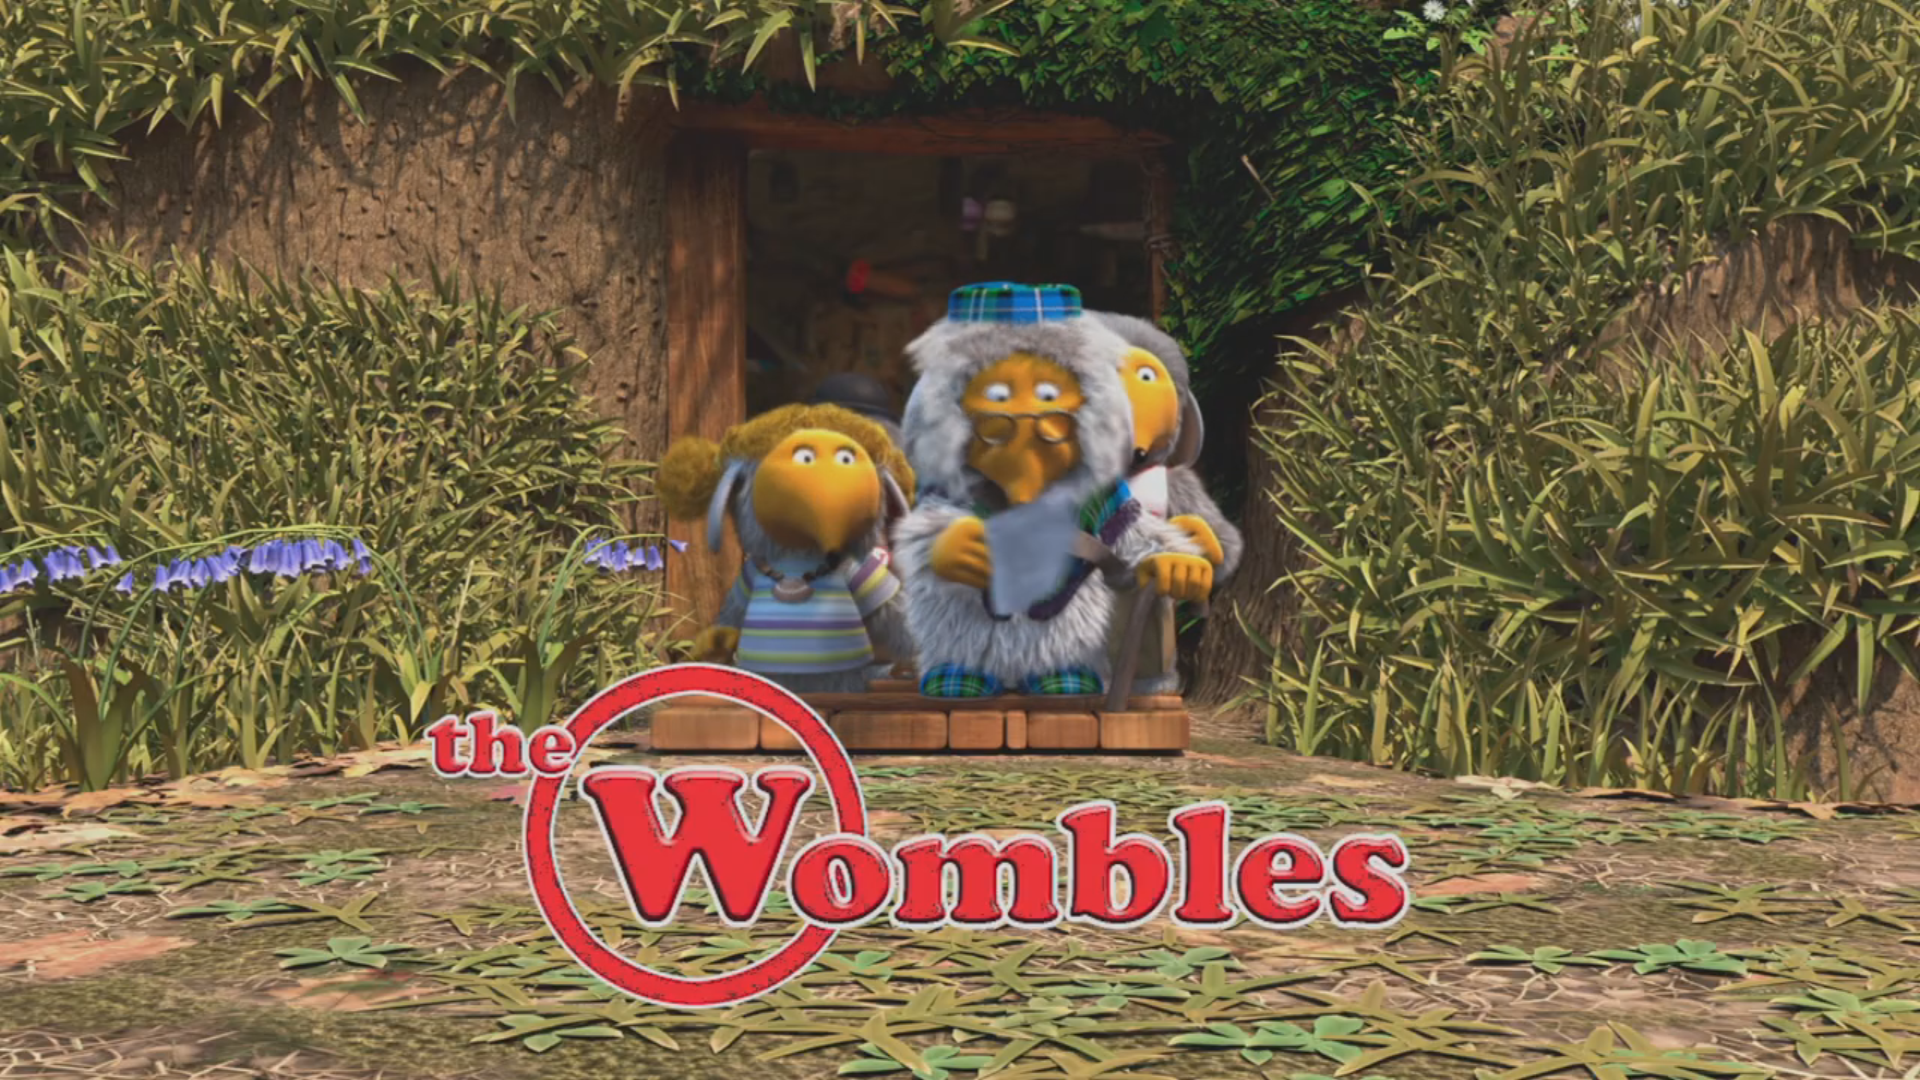 The Wombles (cancelled CGI reboot of British children's TV series; one episode) - The Wombles (partially found cancelled CGI reboot of British children's TV series; 2013-2017)